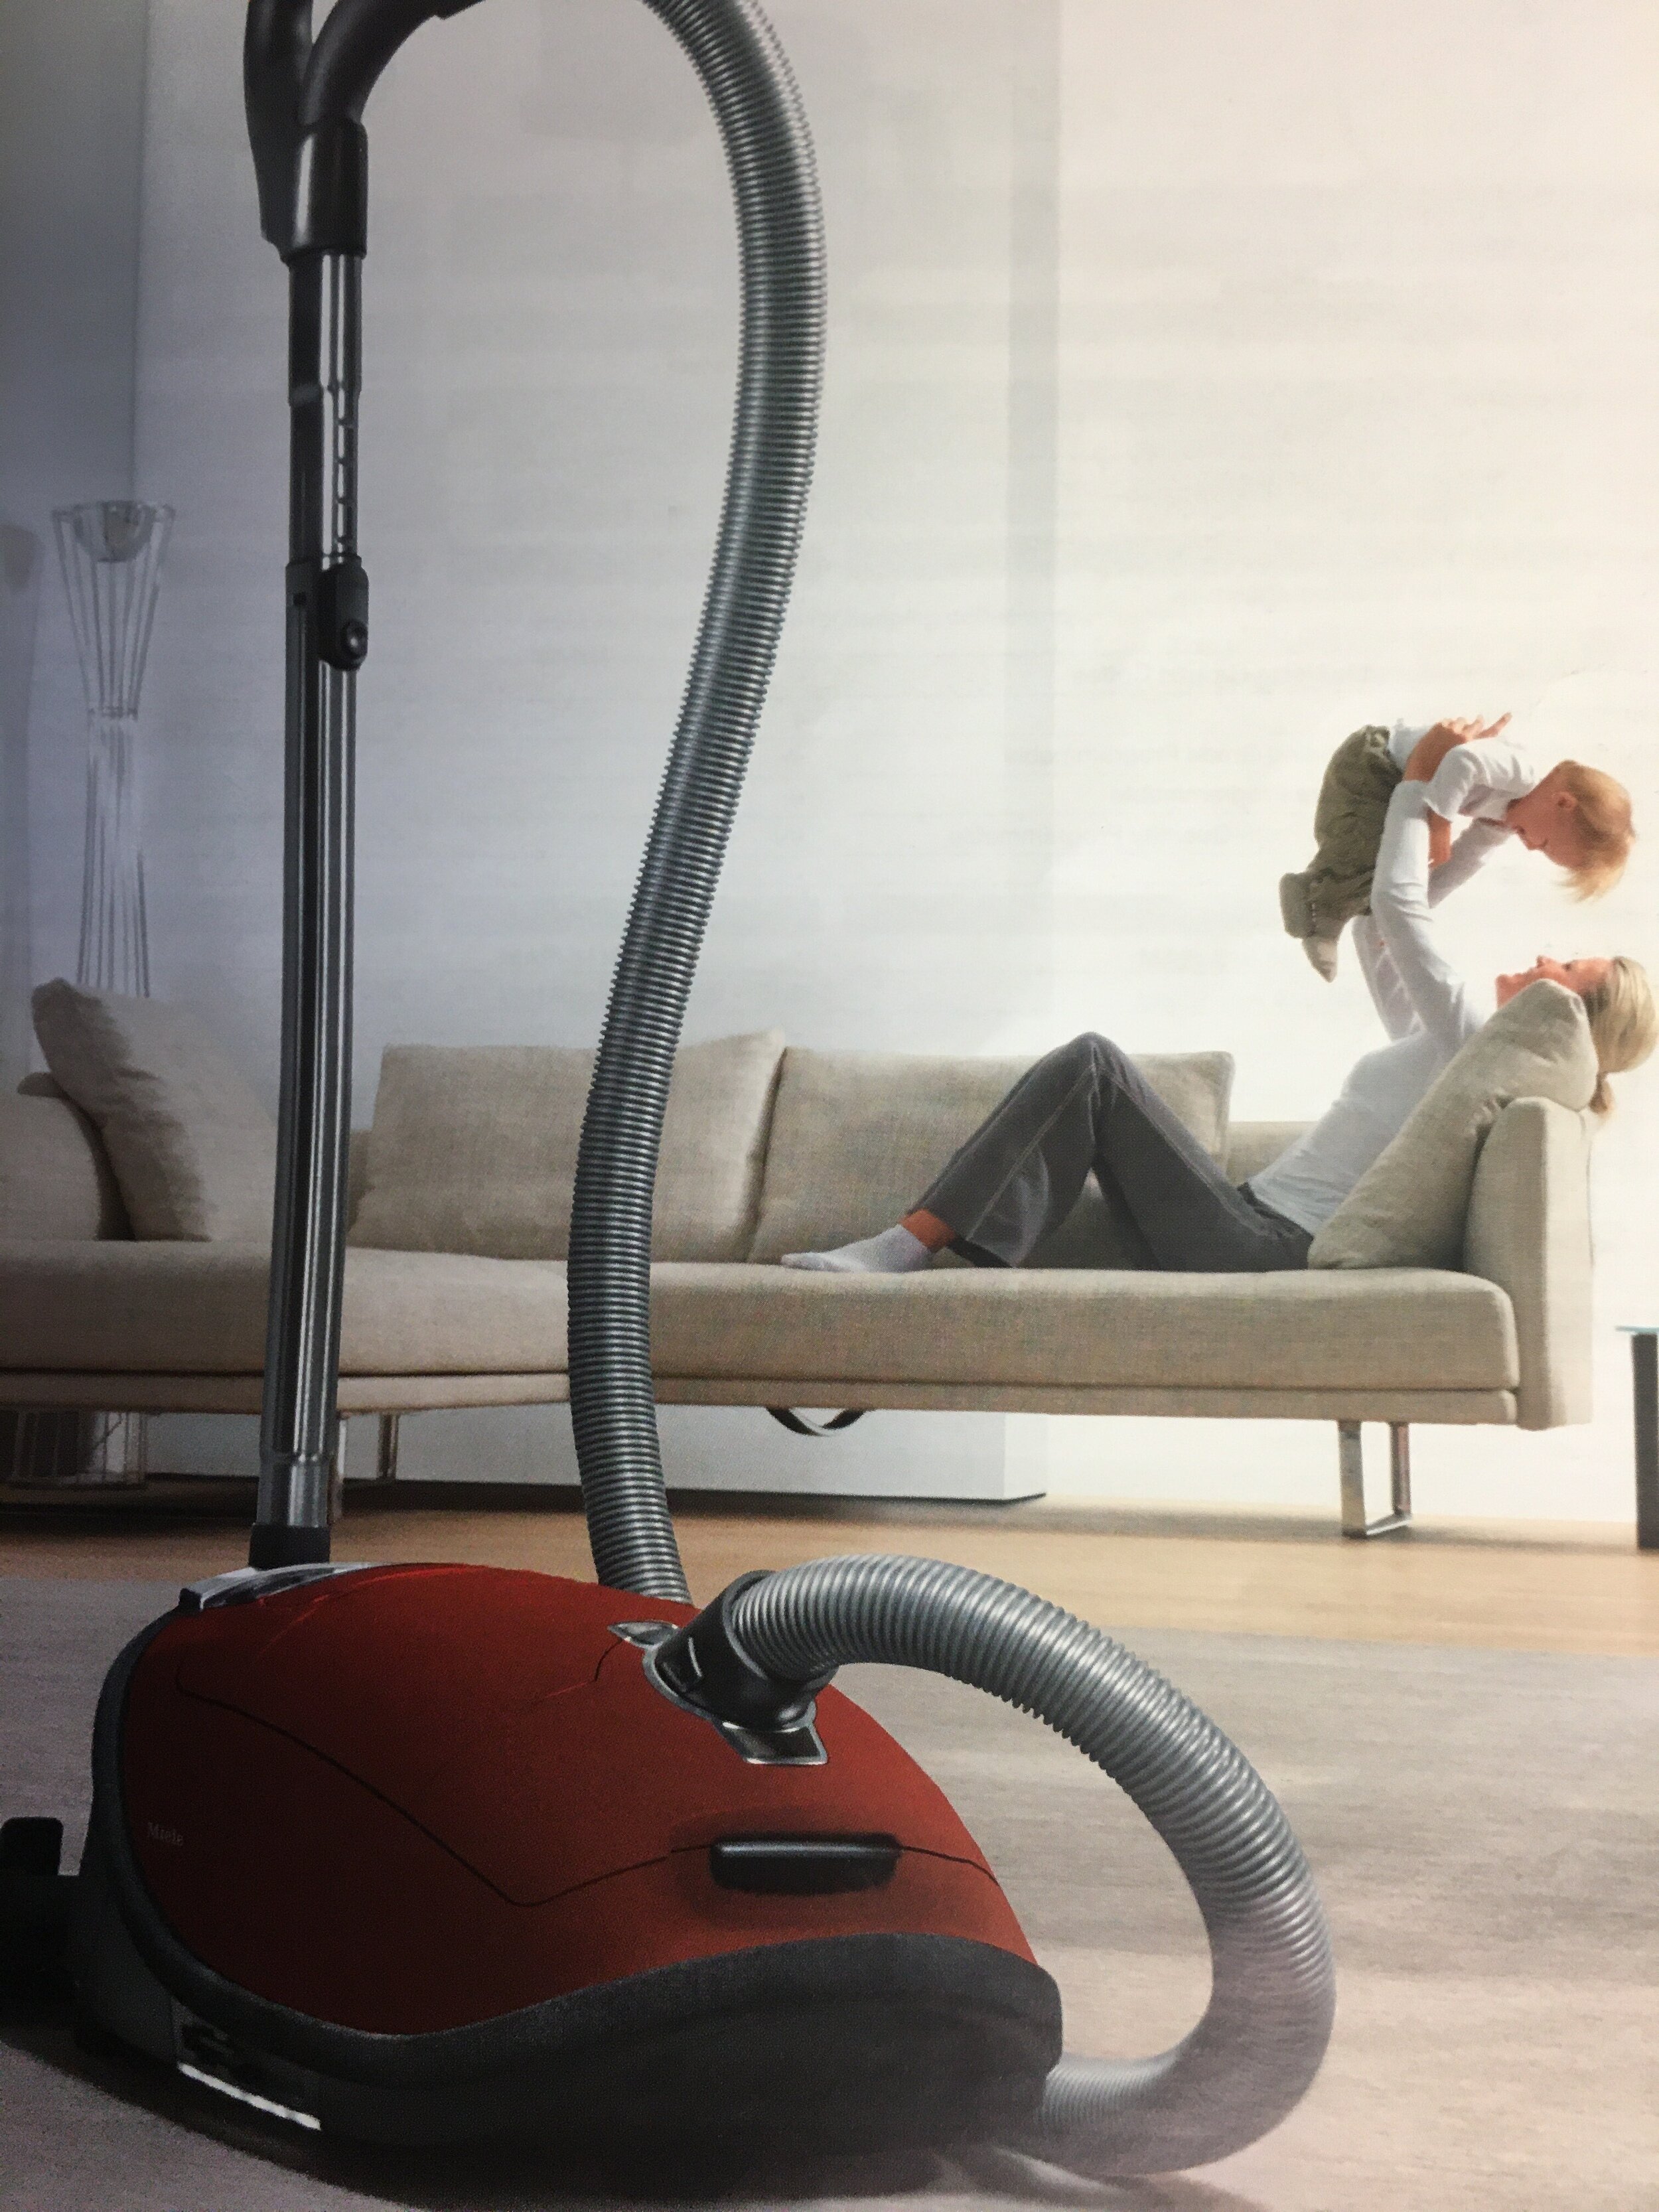 5 Things To Know Before Buying Your Bare Floor Vacuum Everett Vacuum